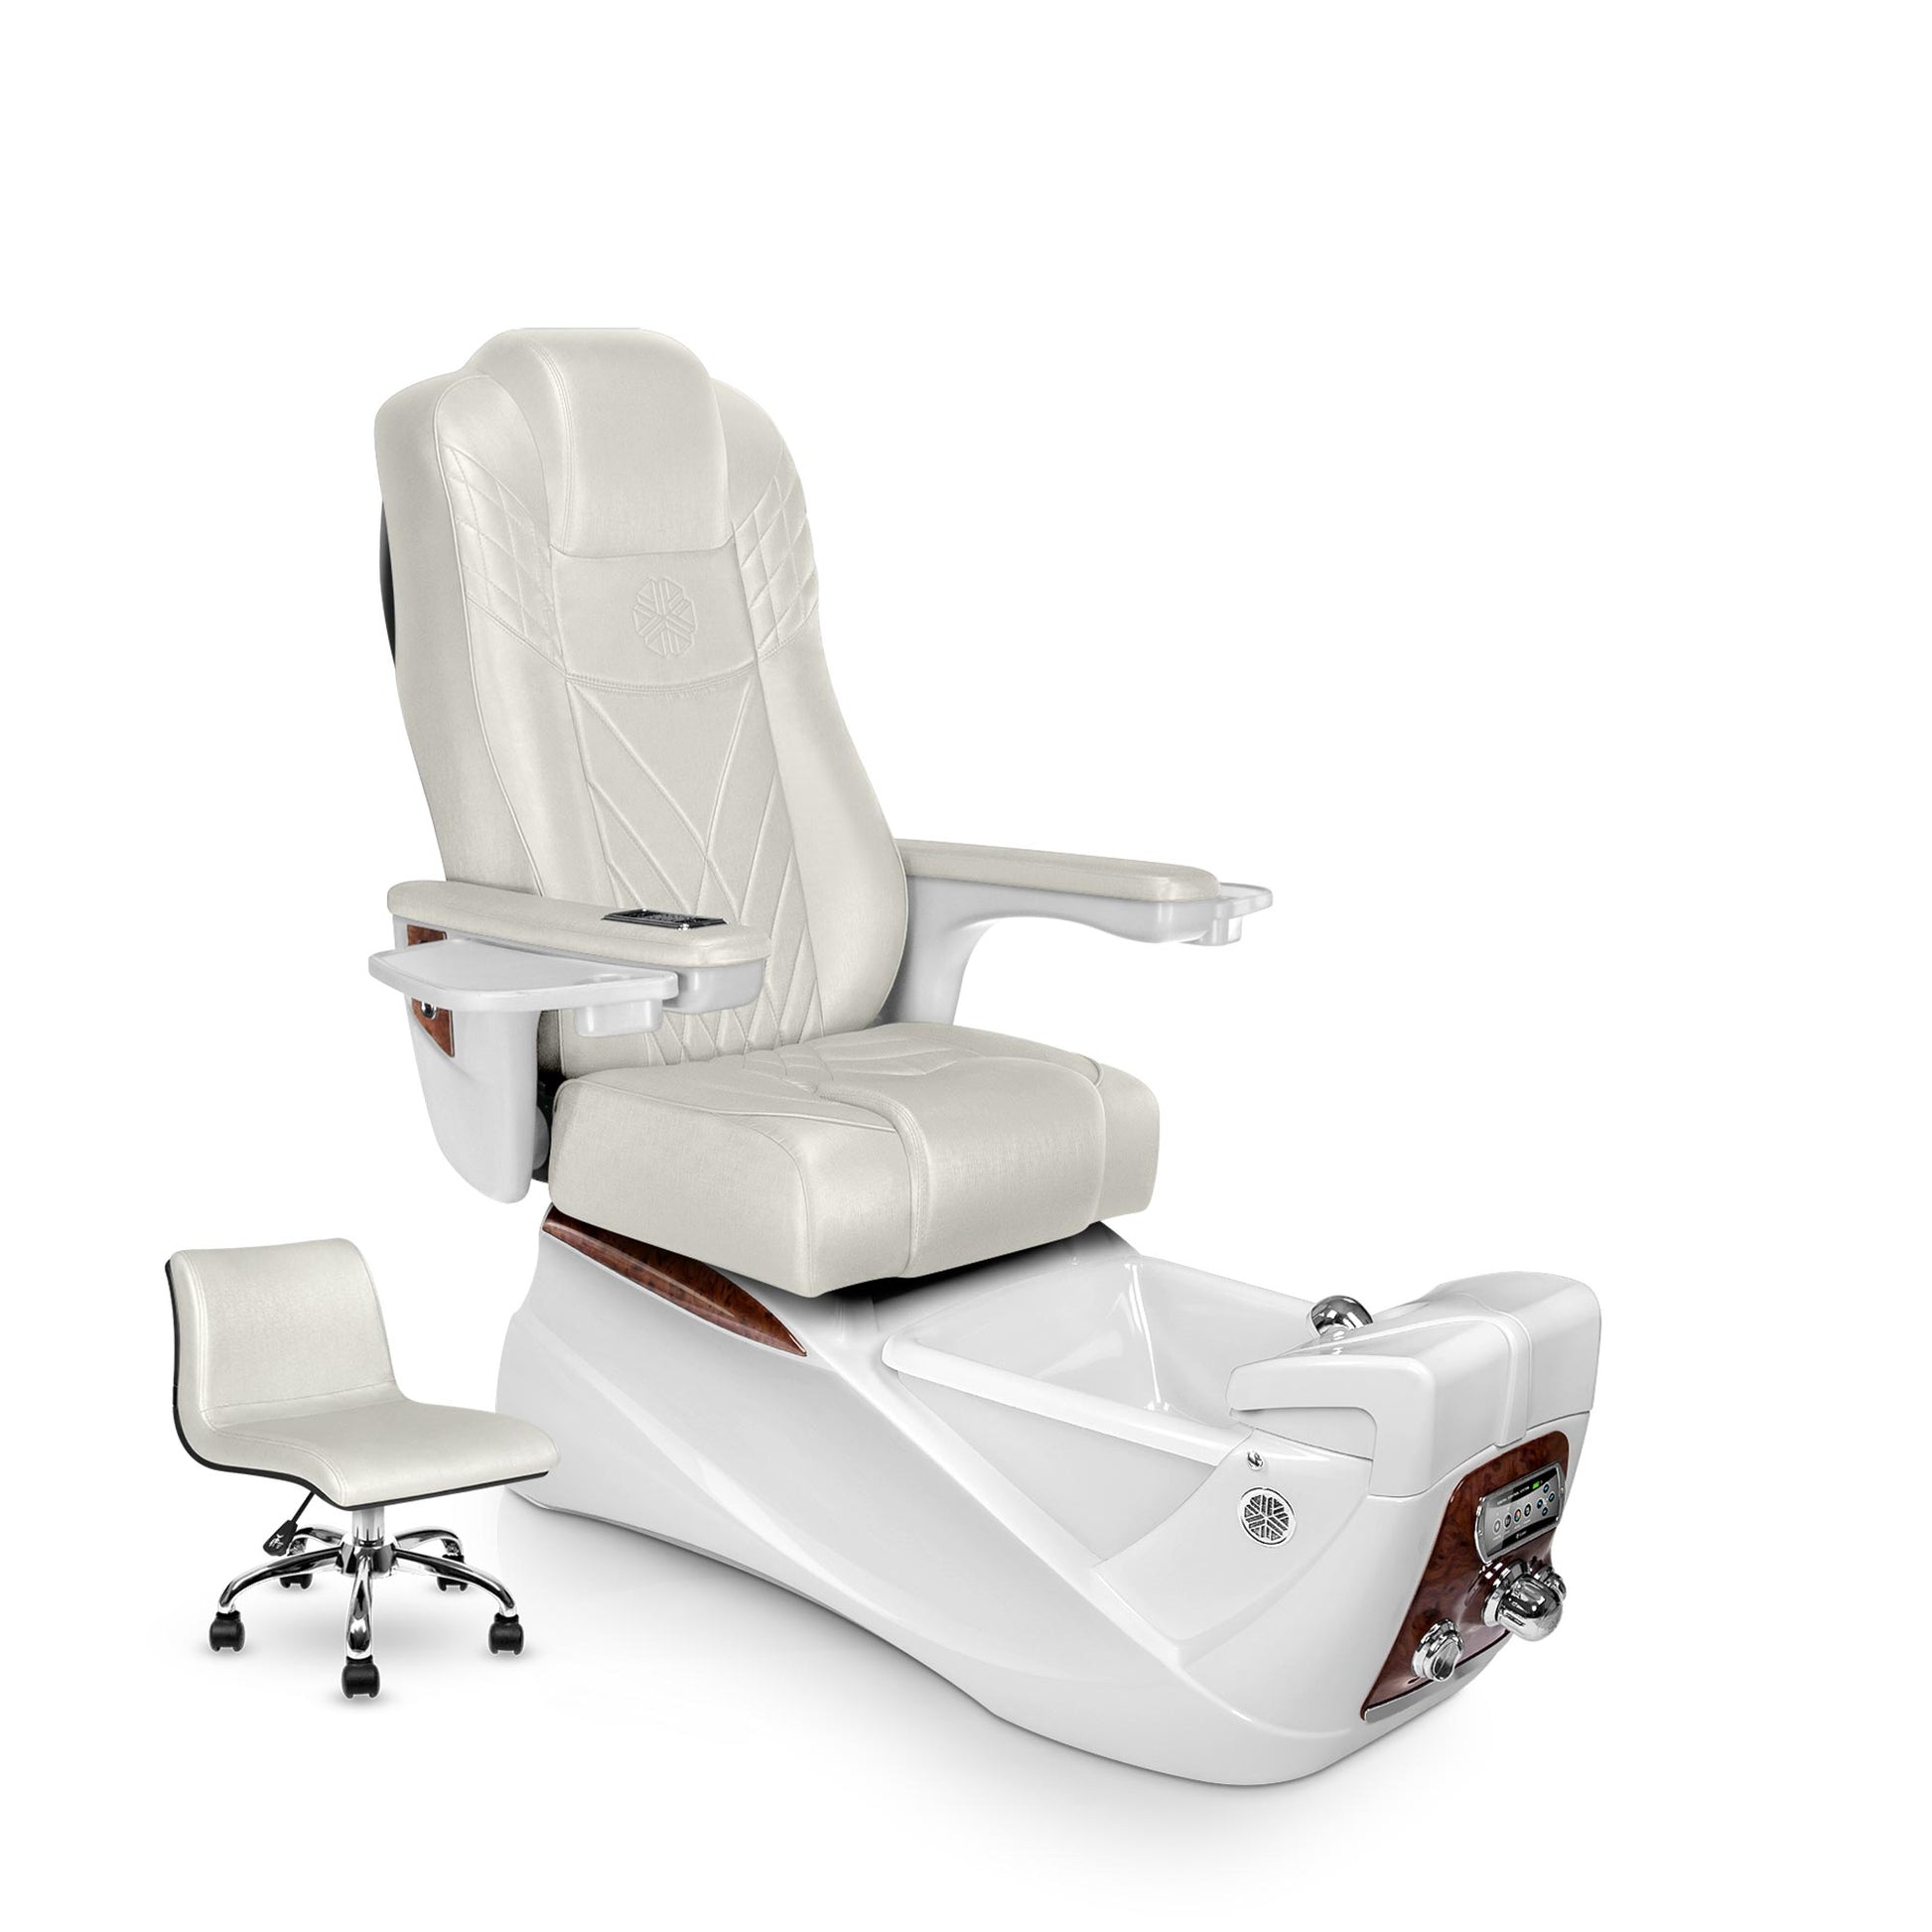 Infinity Pedicure Chair with Opal Cushion and White Pearl Base